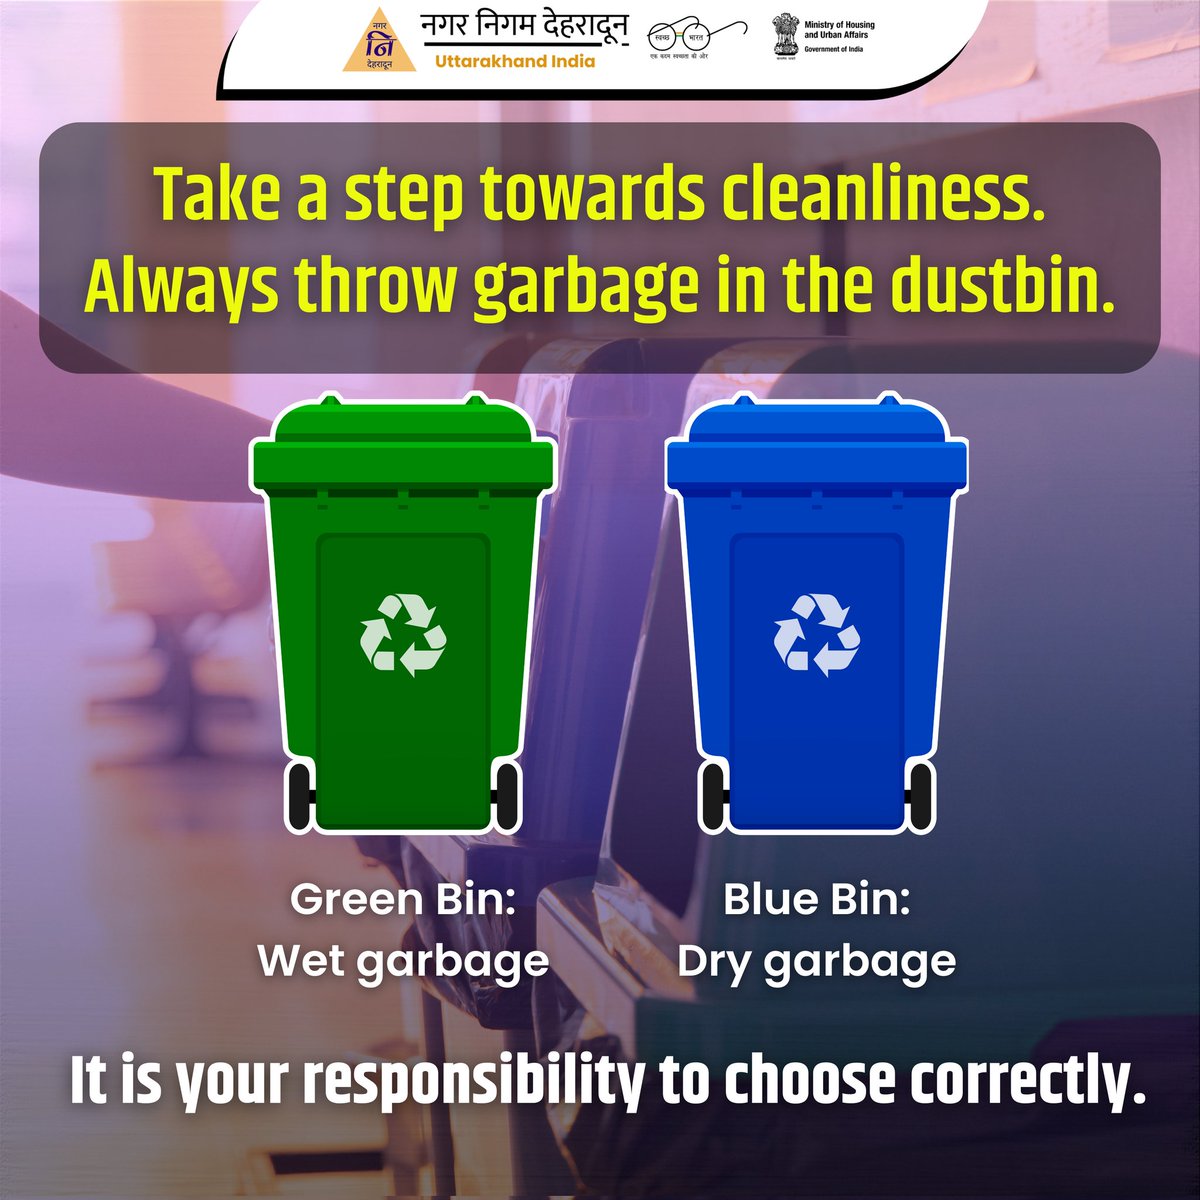 Take a step towards cleanliness.
Always throw garbage in the dustbin.

Green Bin: Wet garbage
Blue Bin: Dry garbage

It is your responsibility to choose correctly.
#SwachhtaAbhiyan #SwachhatakeNaam #SwachhataHumaraDharma #CleanlinessCampaign #SwachhBharatMission #GarbageFreeIndia